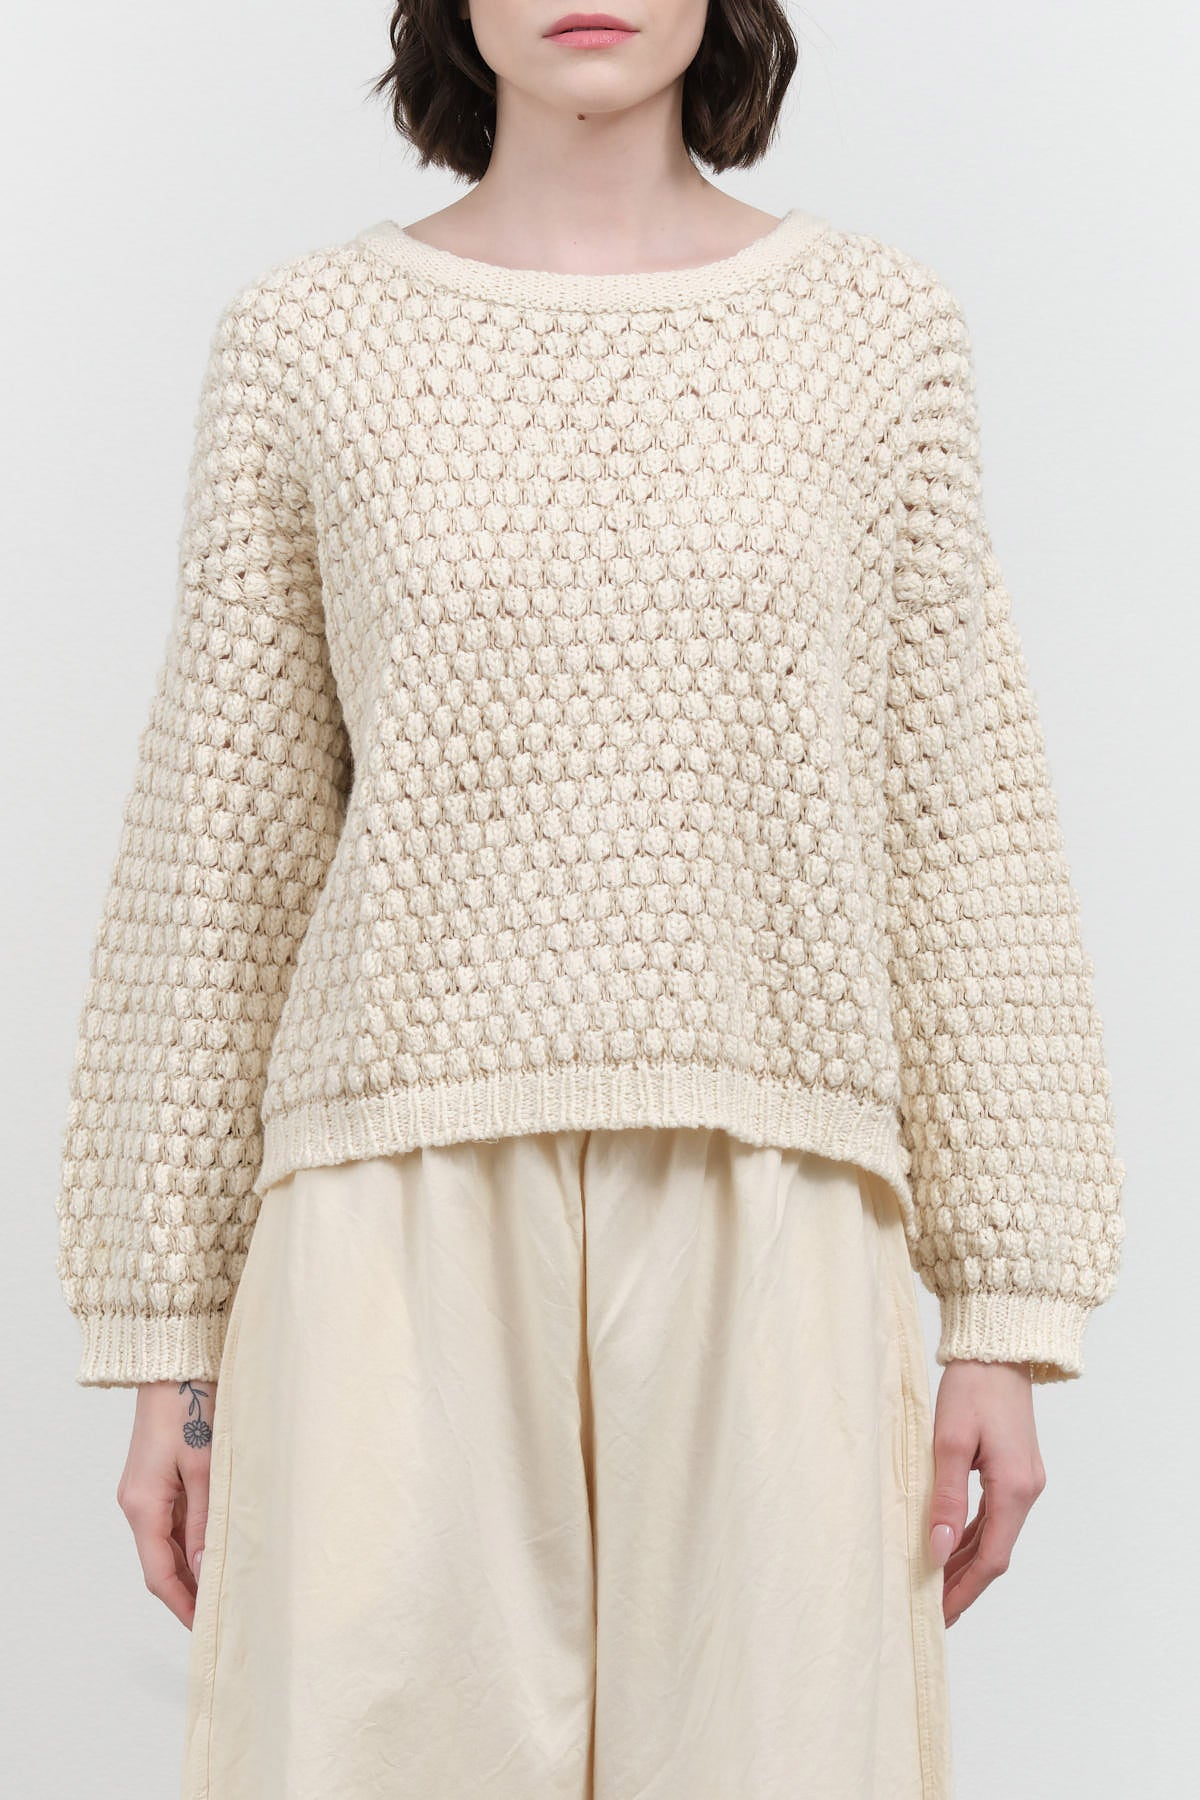 Textured Pullover by Wol Hide in Bone